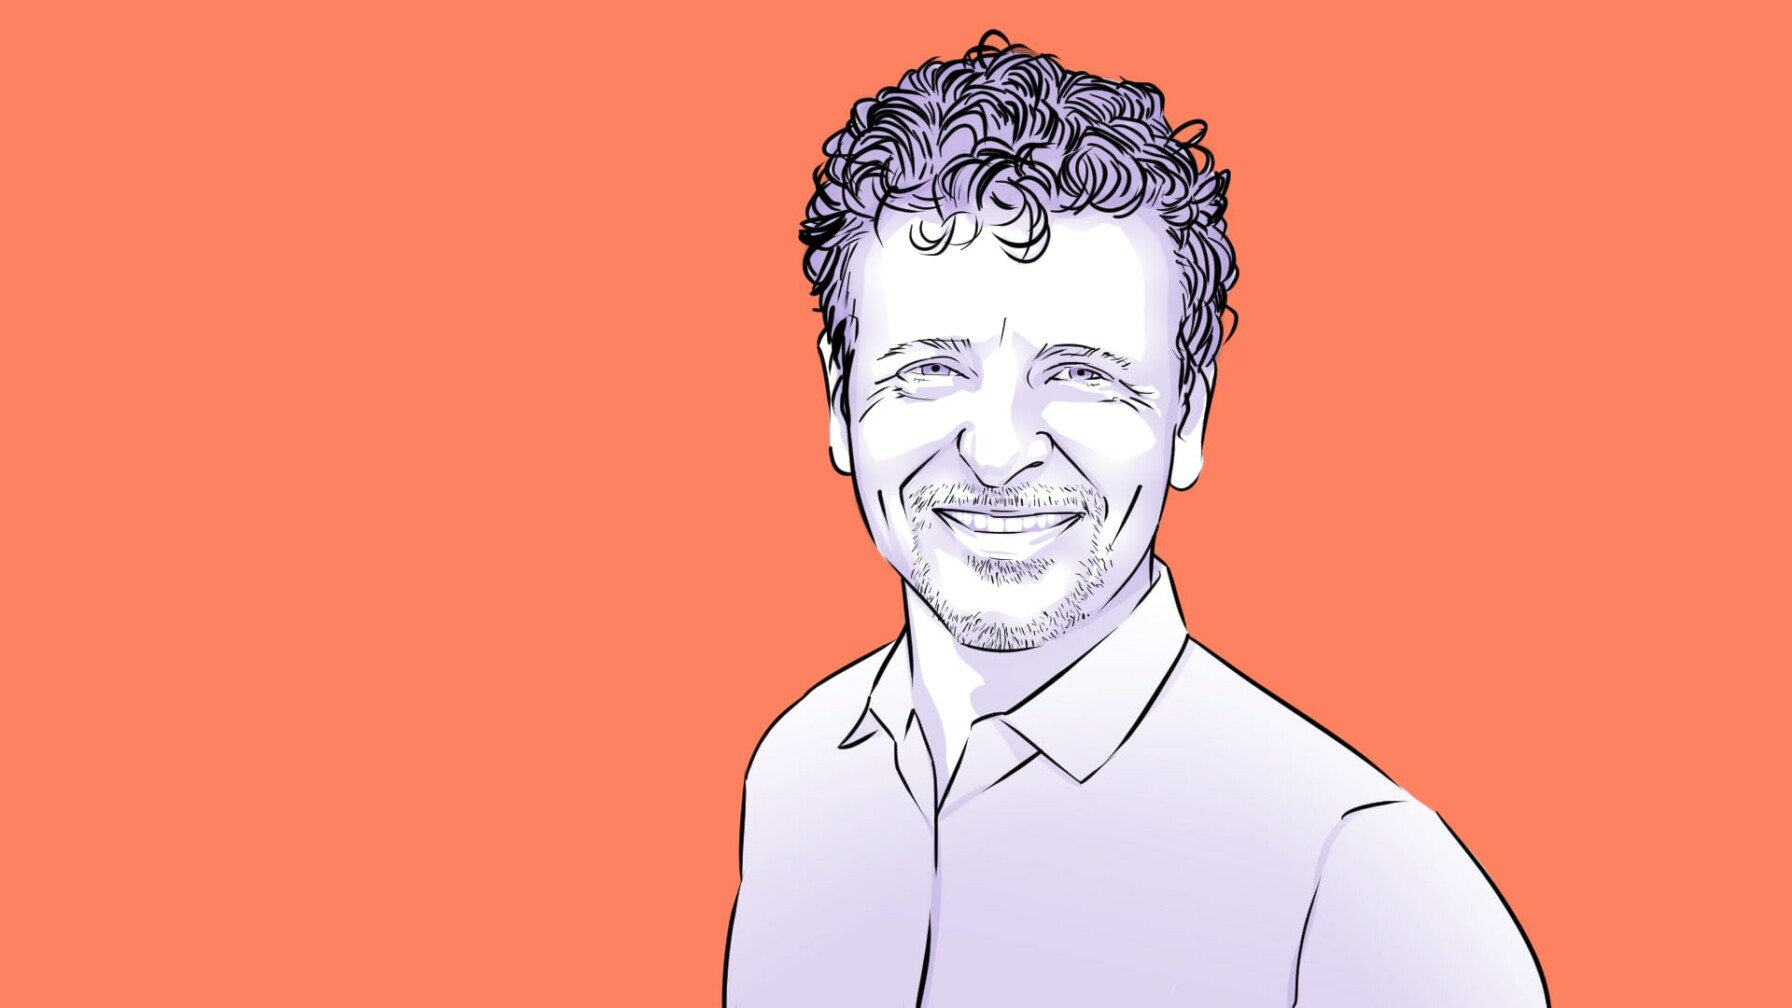 Michael Horvath, co-founder and CEO of Strava